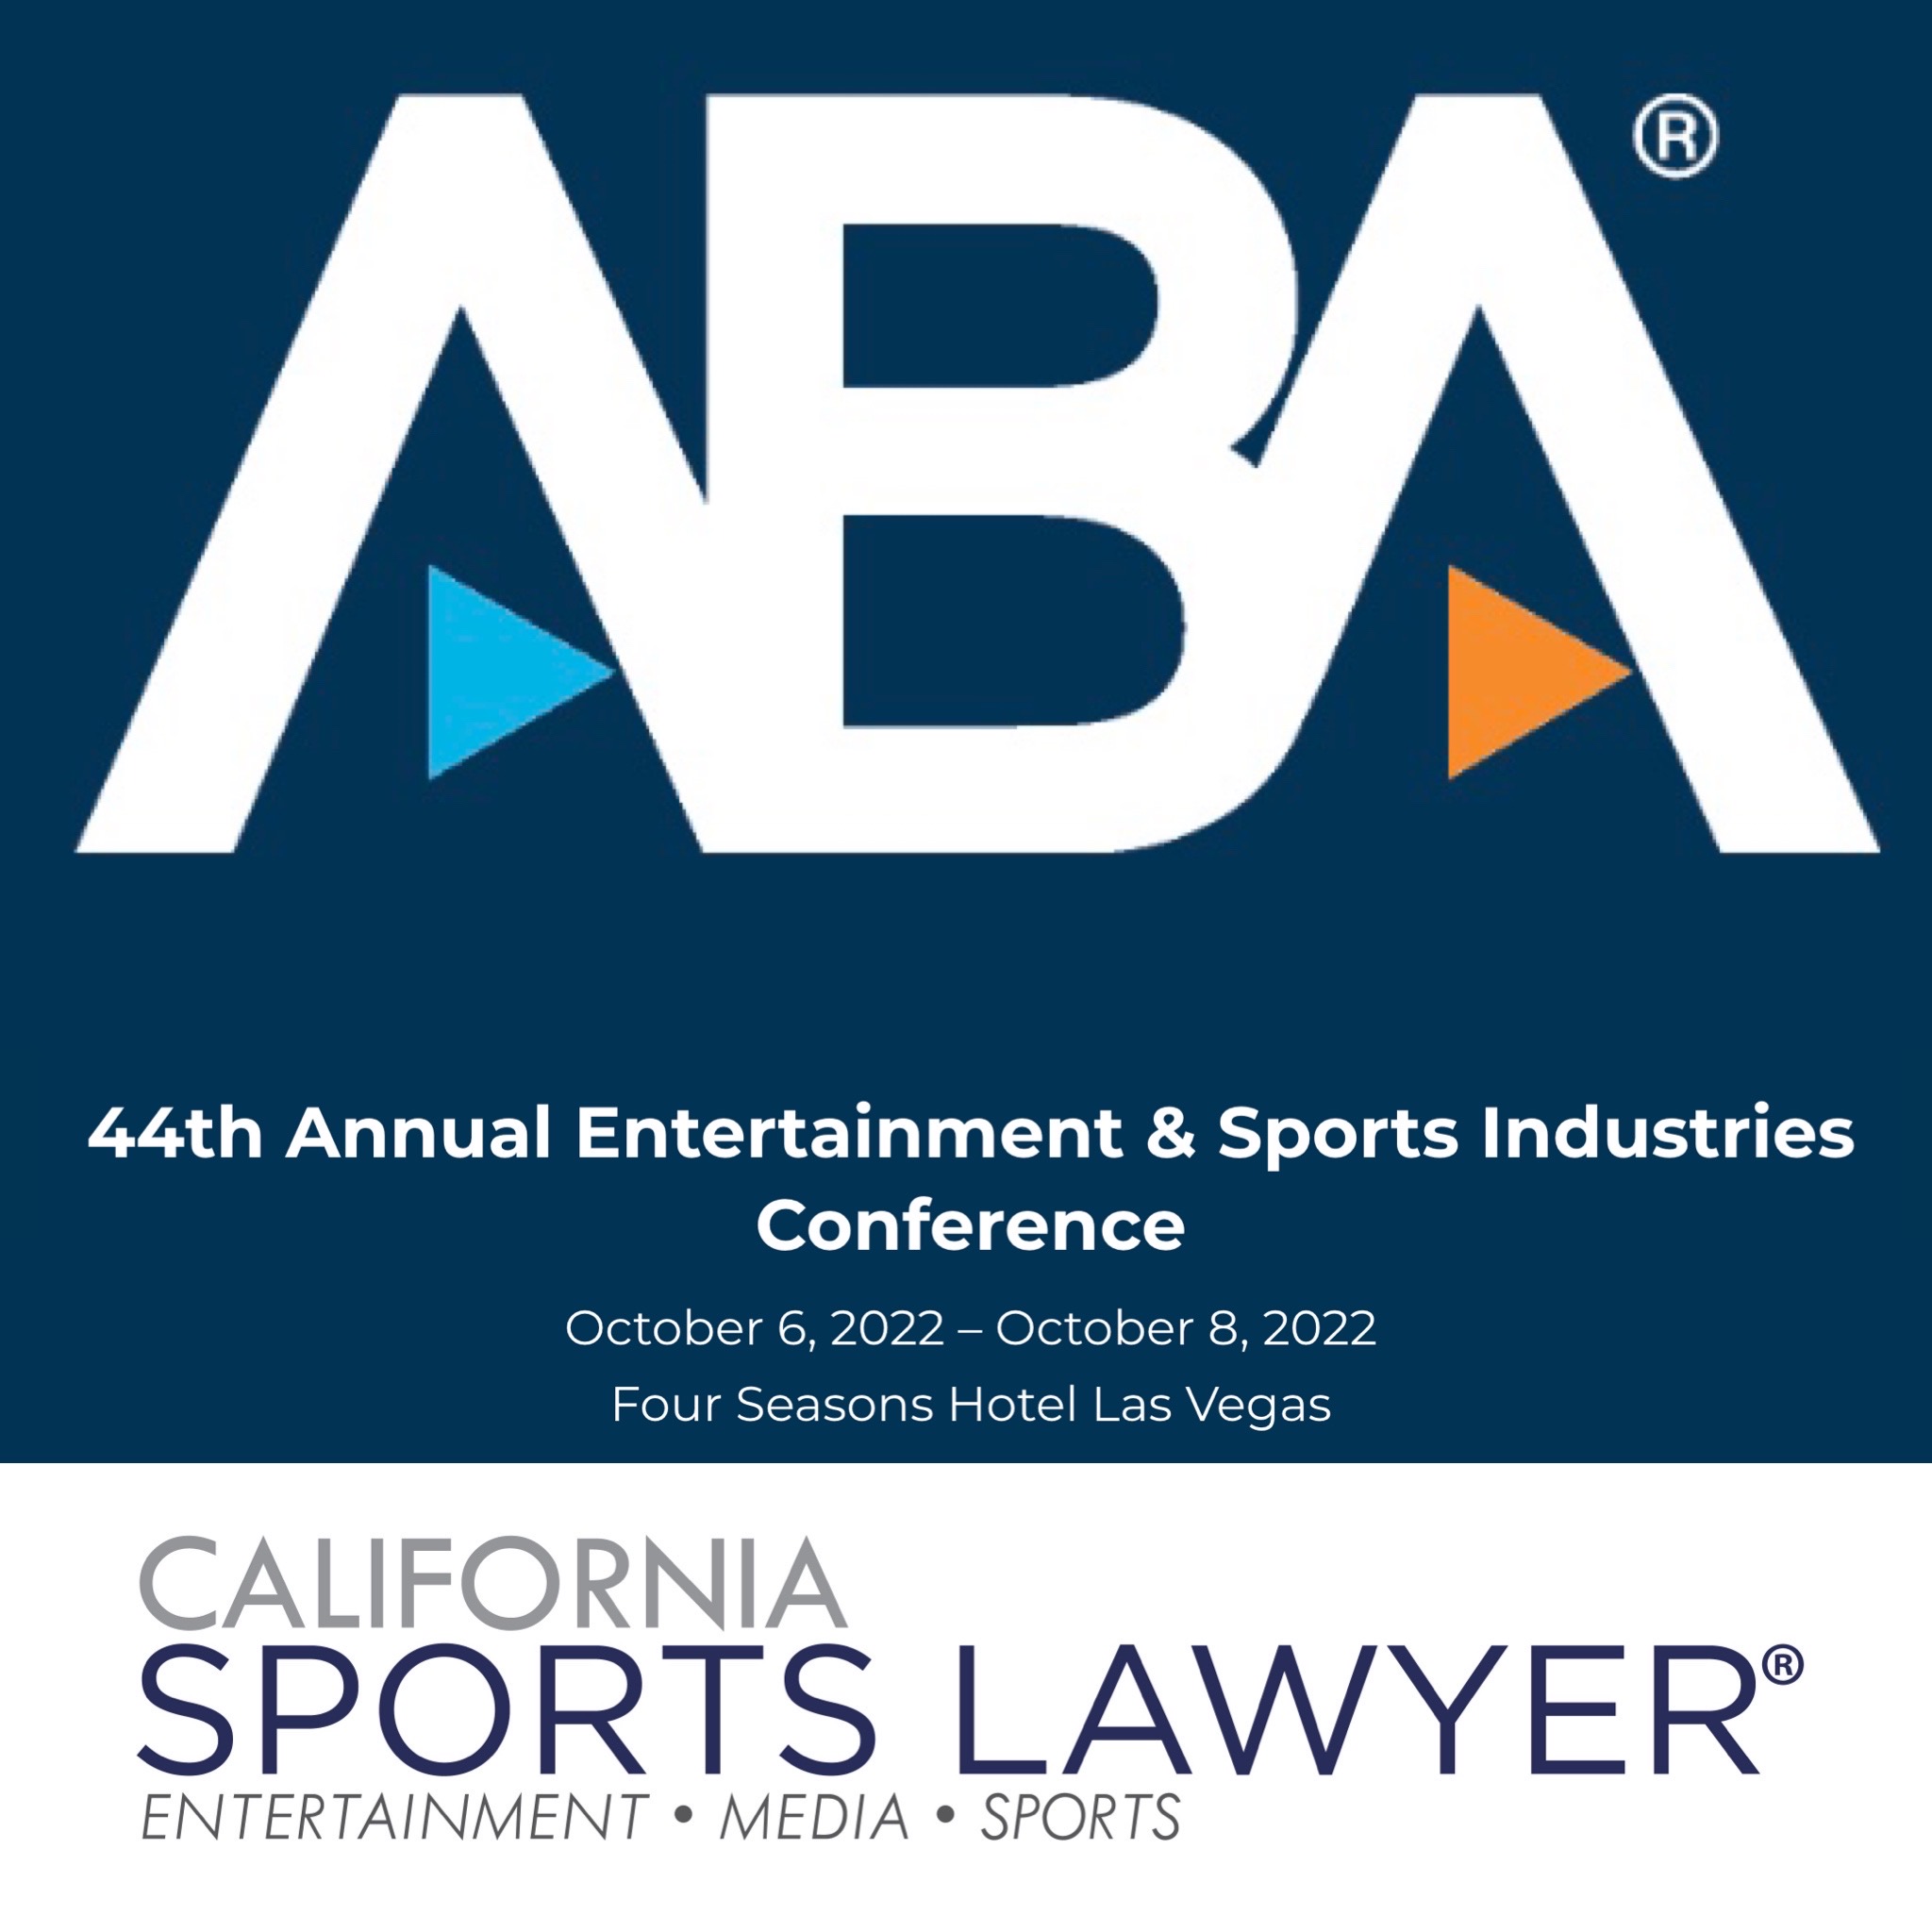 Jeremy Evans to speak at the ABA's 44th Annual Entertainment & Sports Industries Conference in Las Vegas